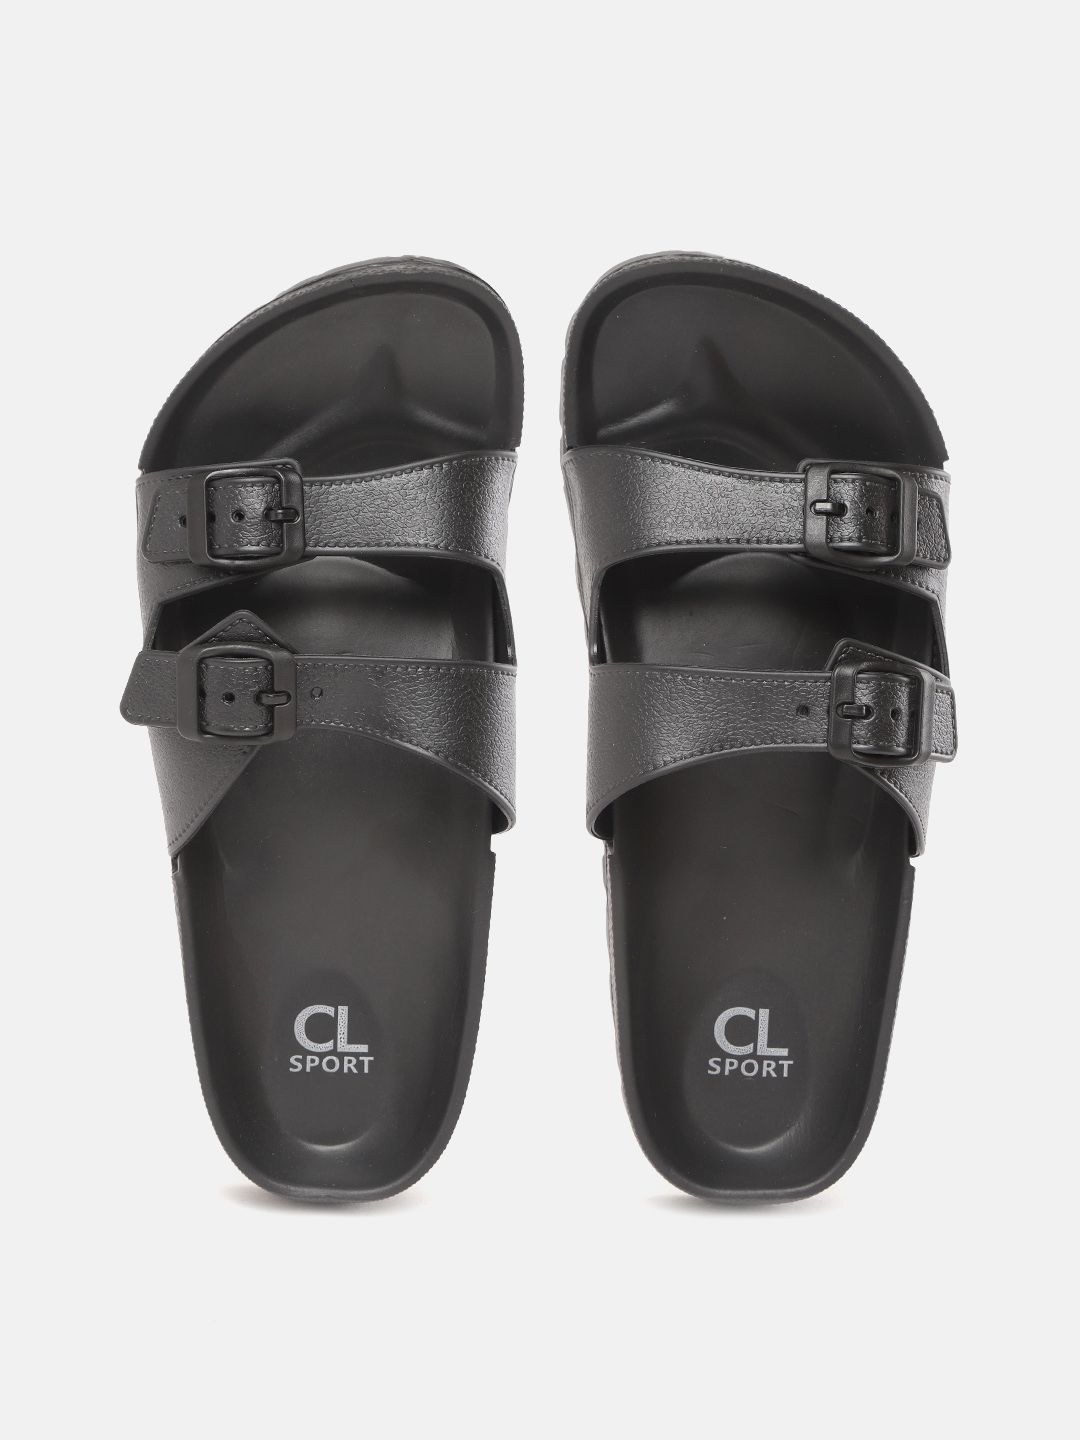 Carlton London Women Black Slip-Ons with Buckles Price in India